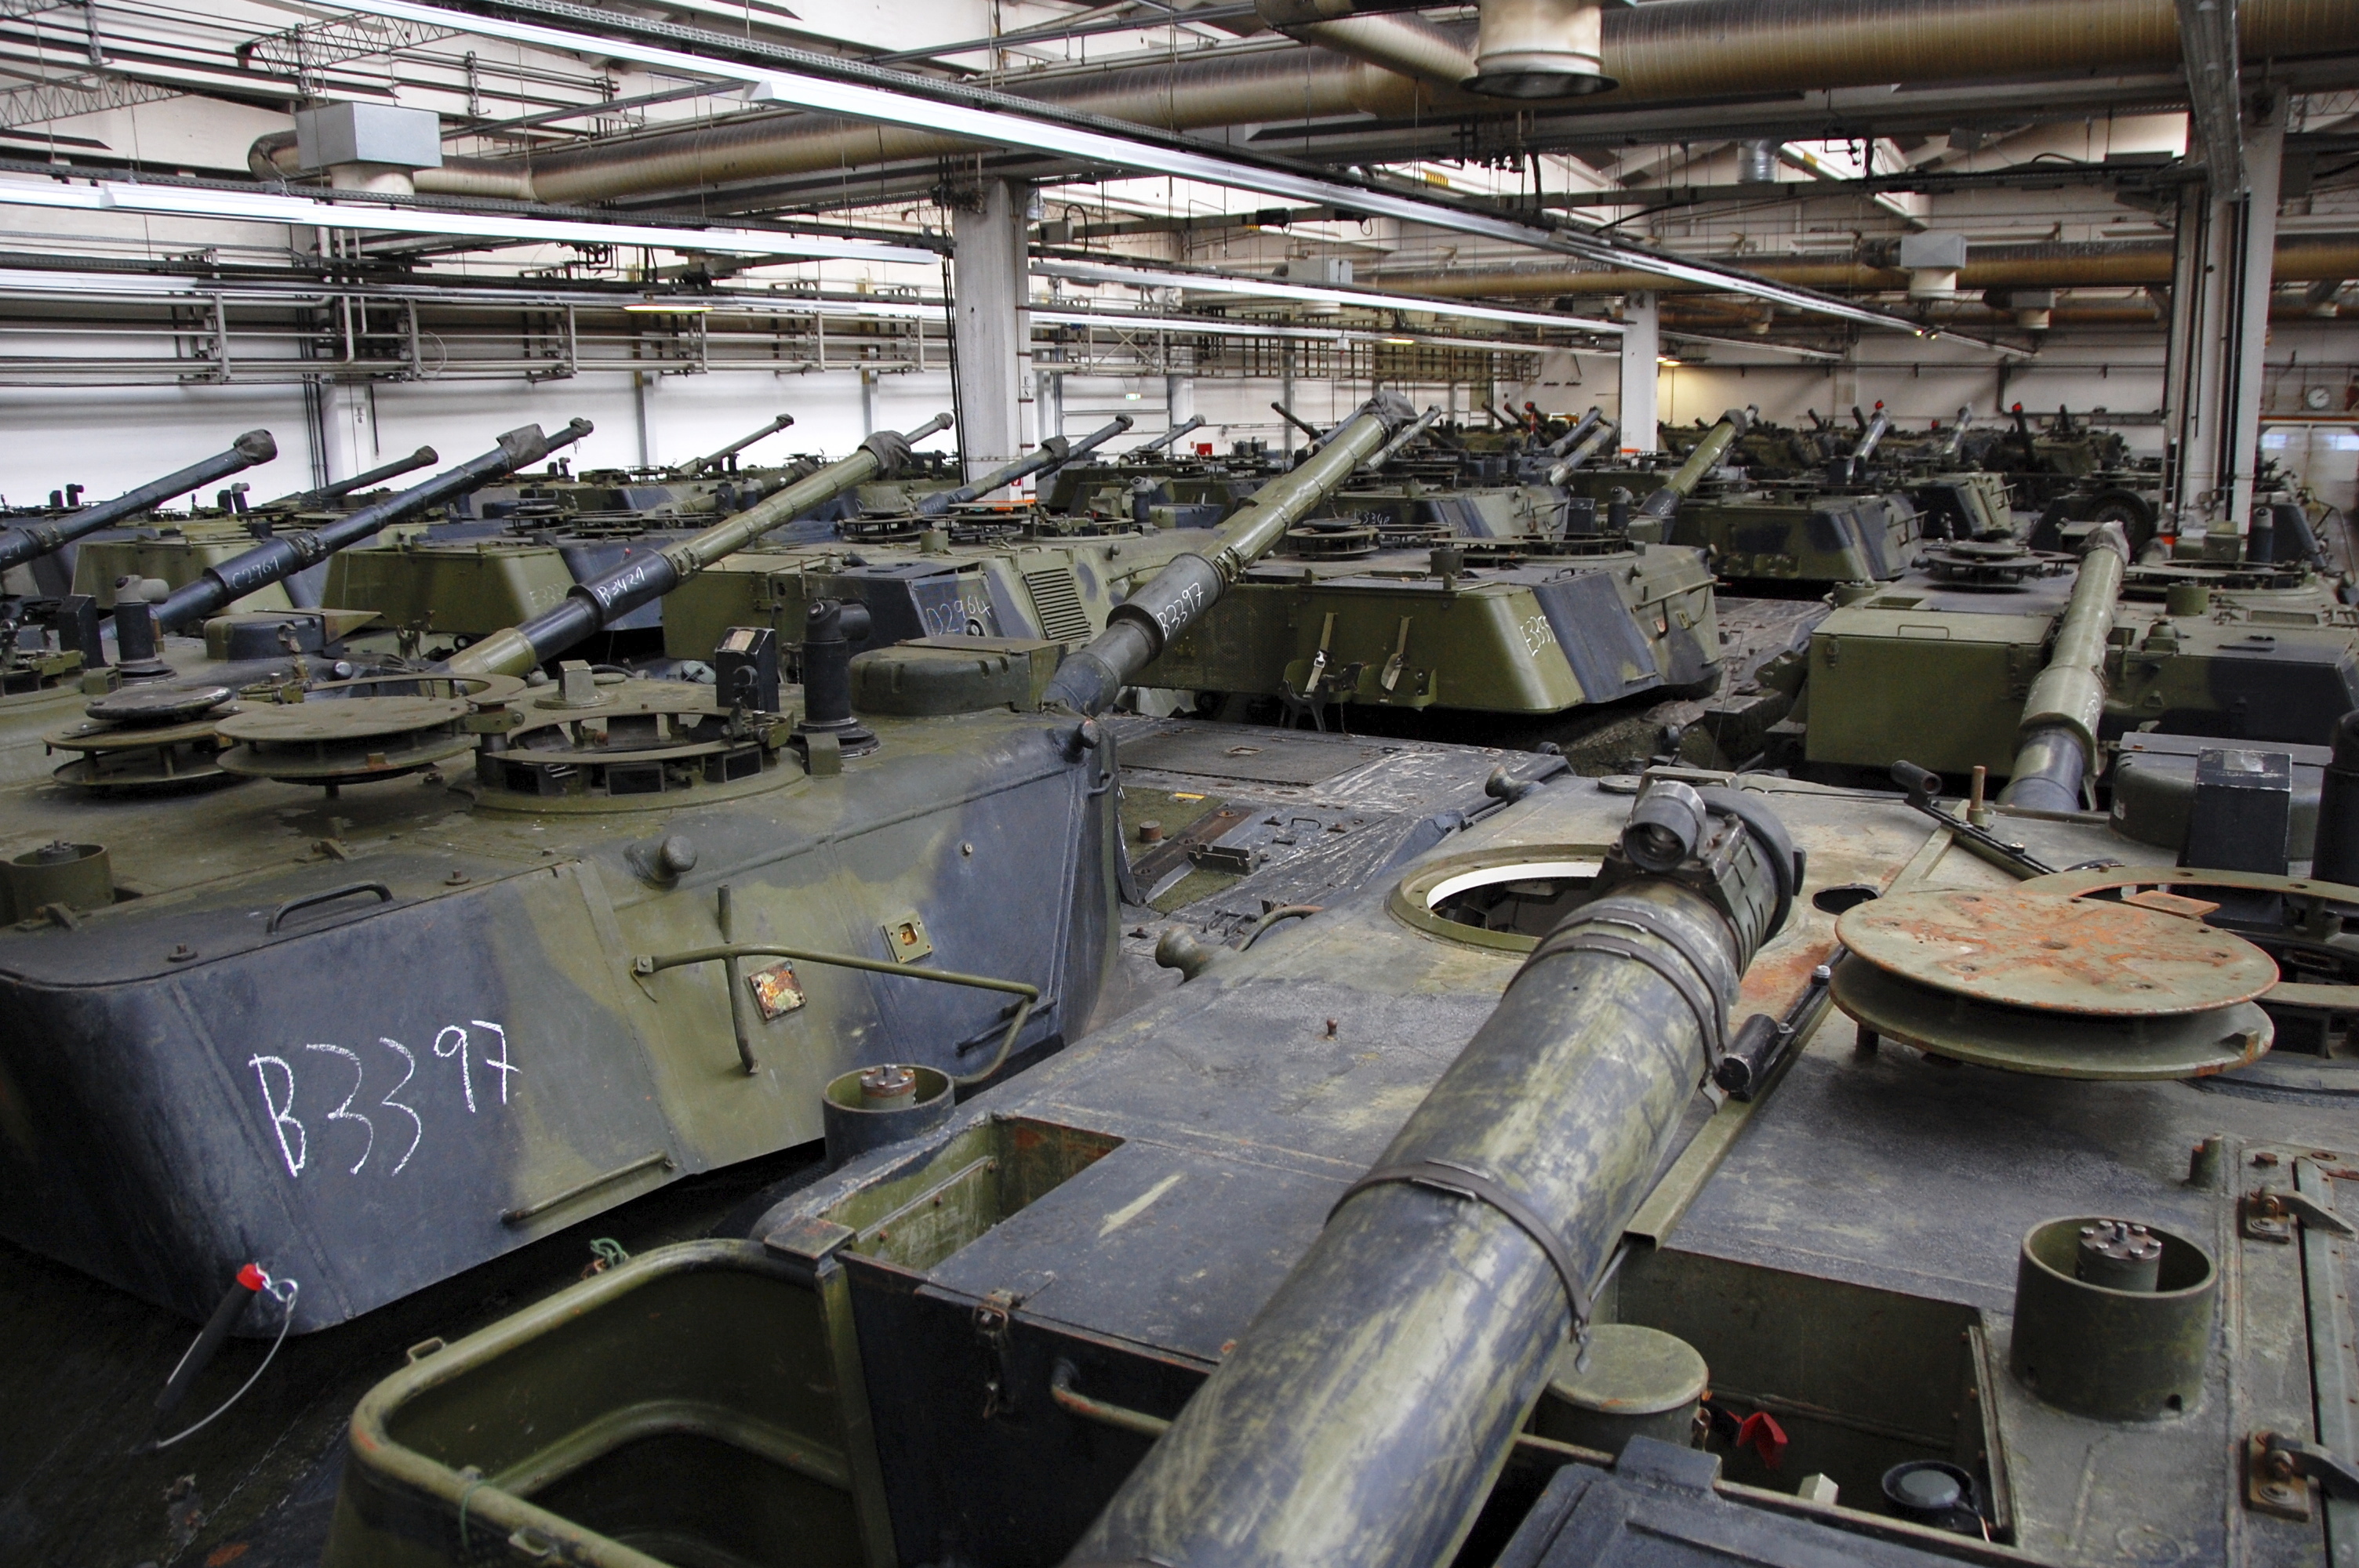 Europe Struggles to Find Leopard 2 Tanks for Ukraine - The New York Times